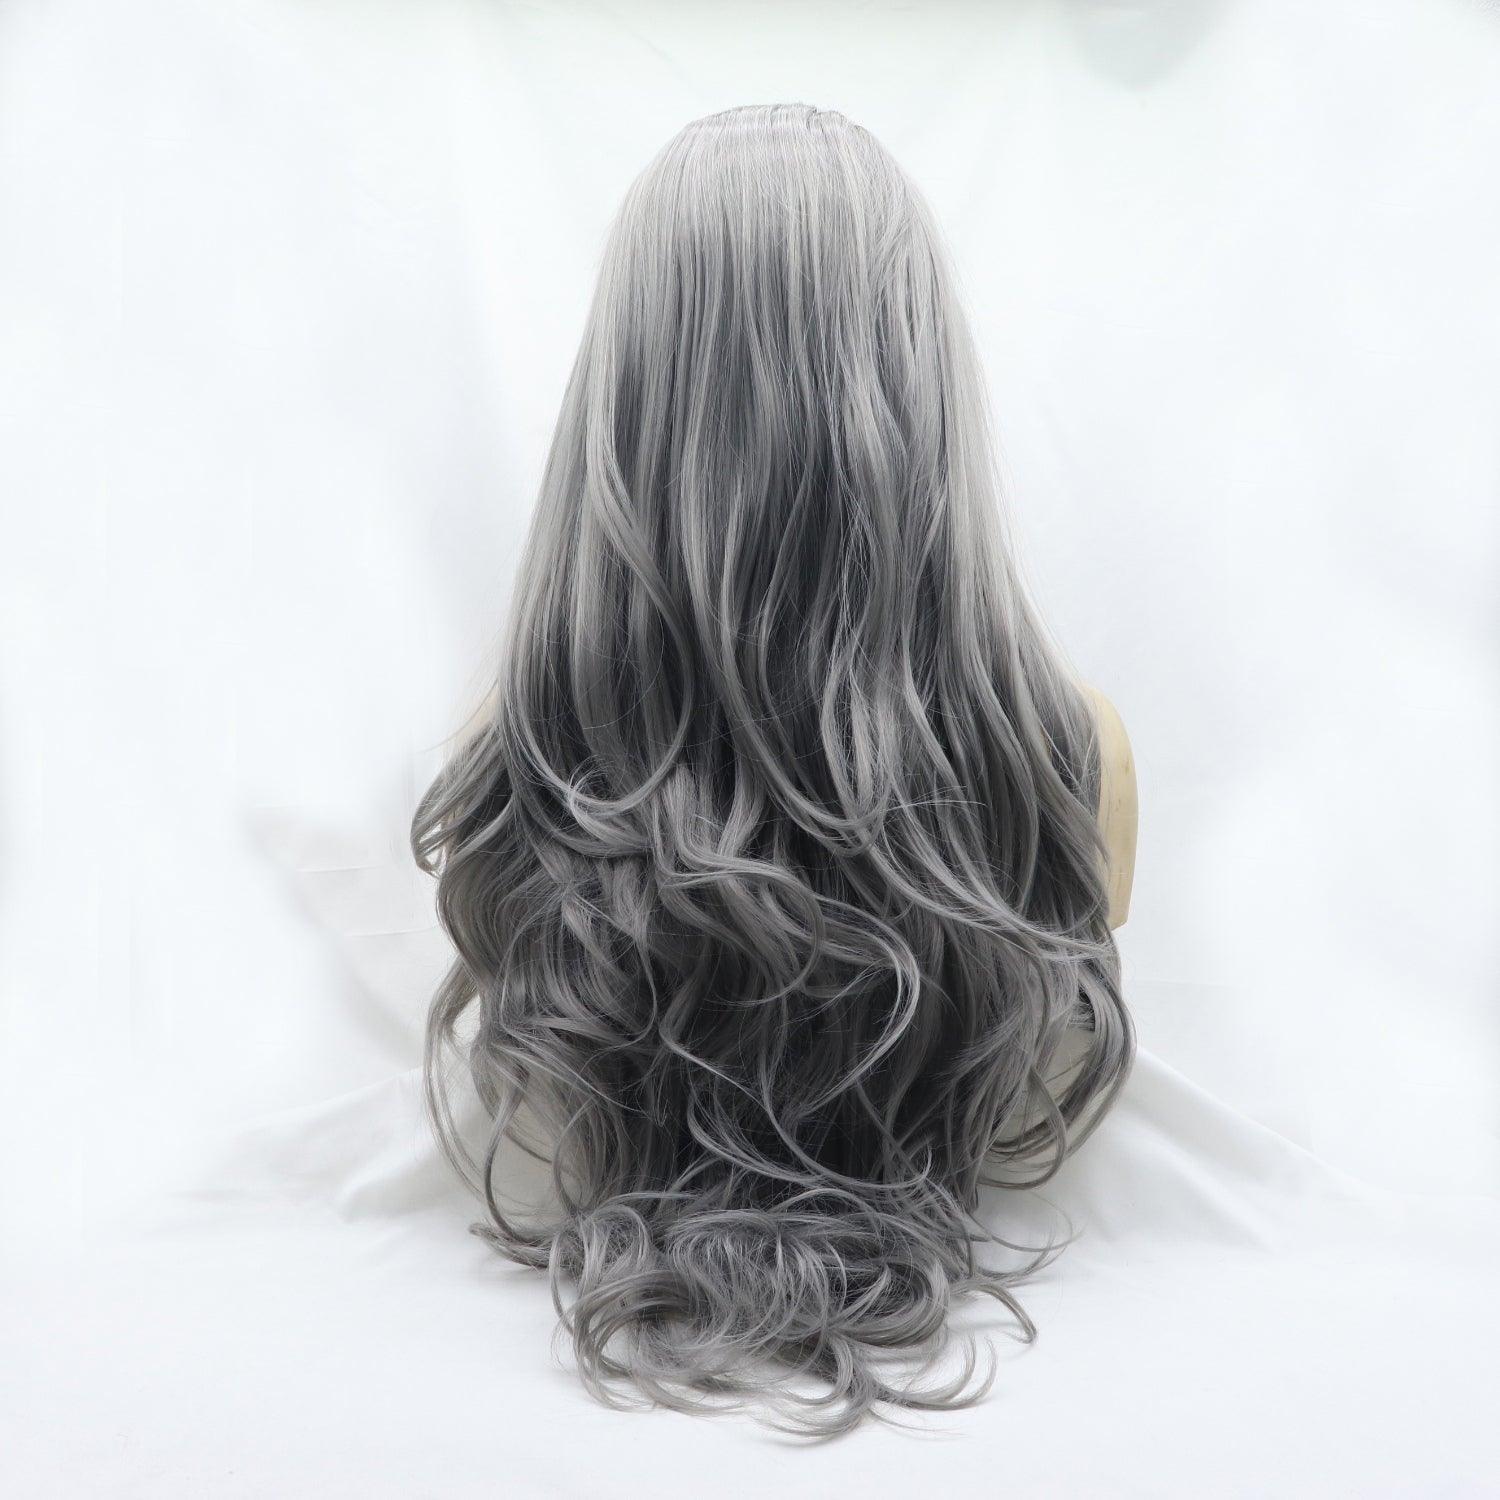 a woman's long grey hair is shown from the back